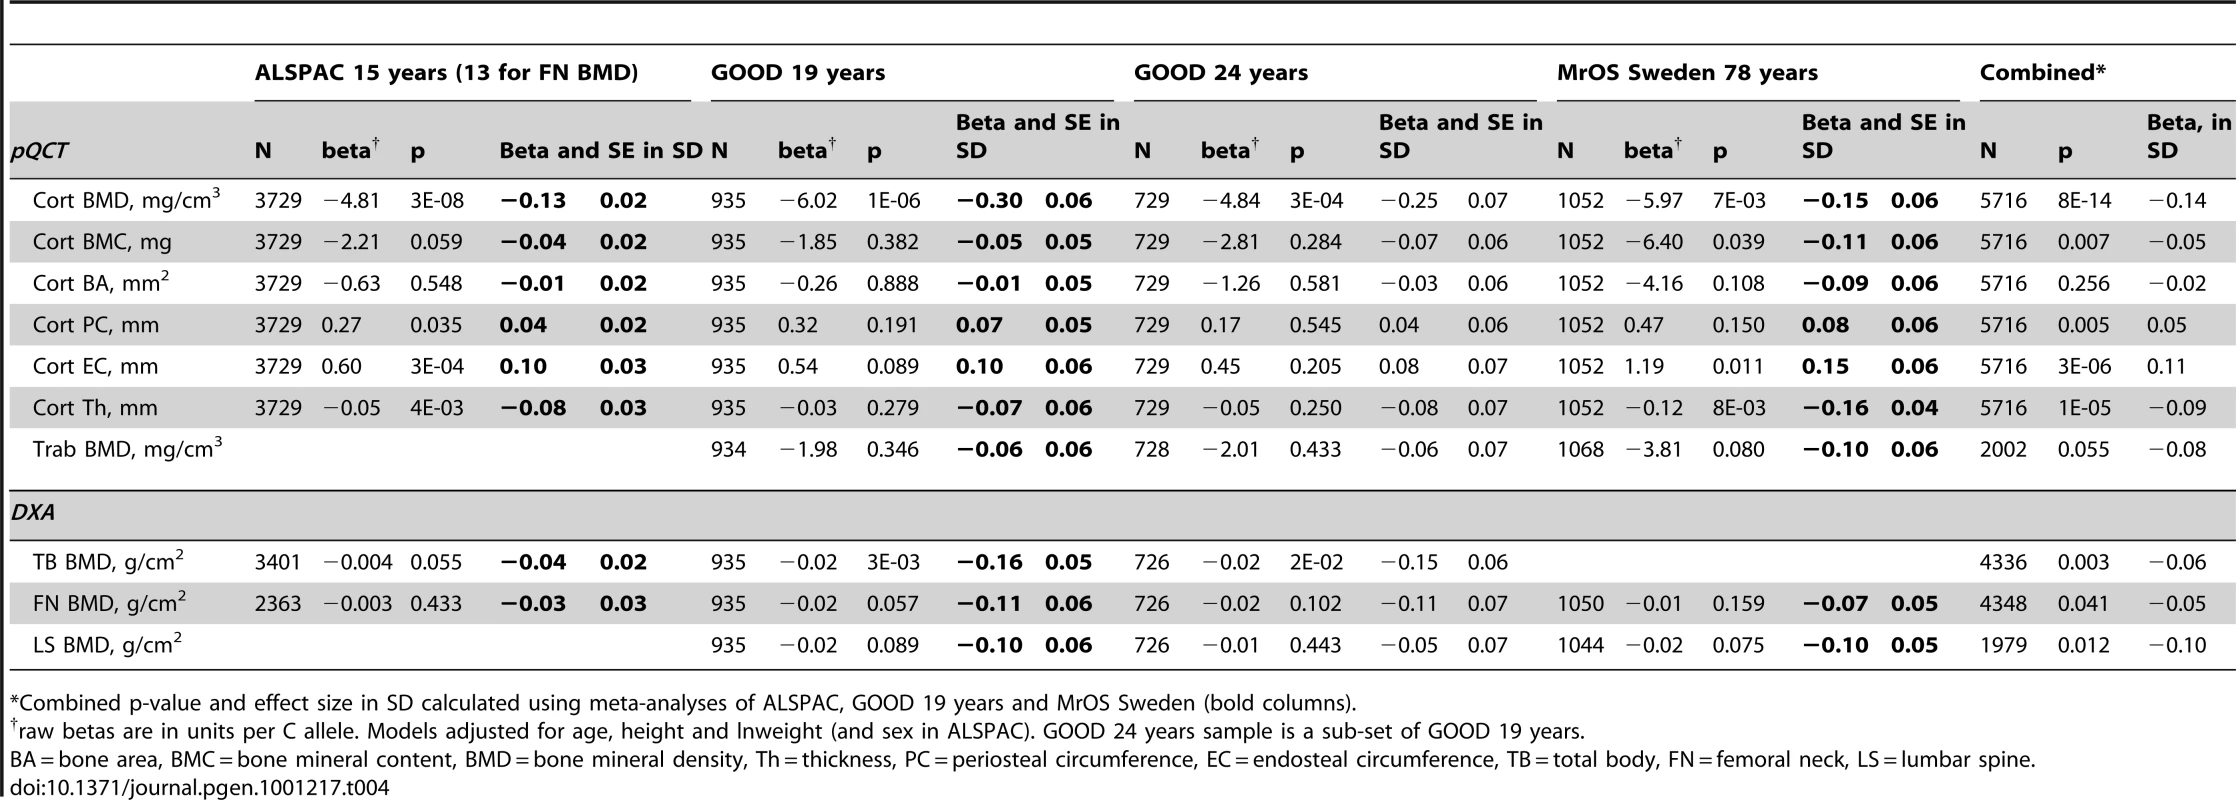 rs1021188 associations with bone parameters at different ages and meta-analyses results (combining ALSPAC, GOOD 19, and MrOS Sweden).